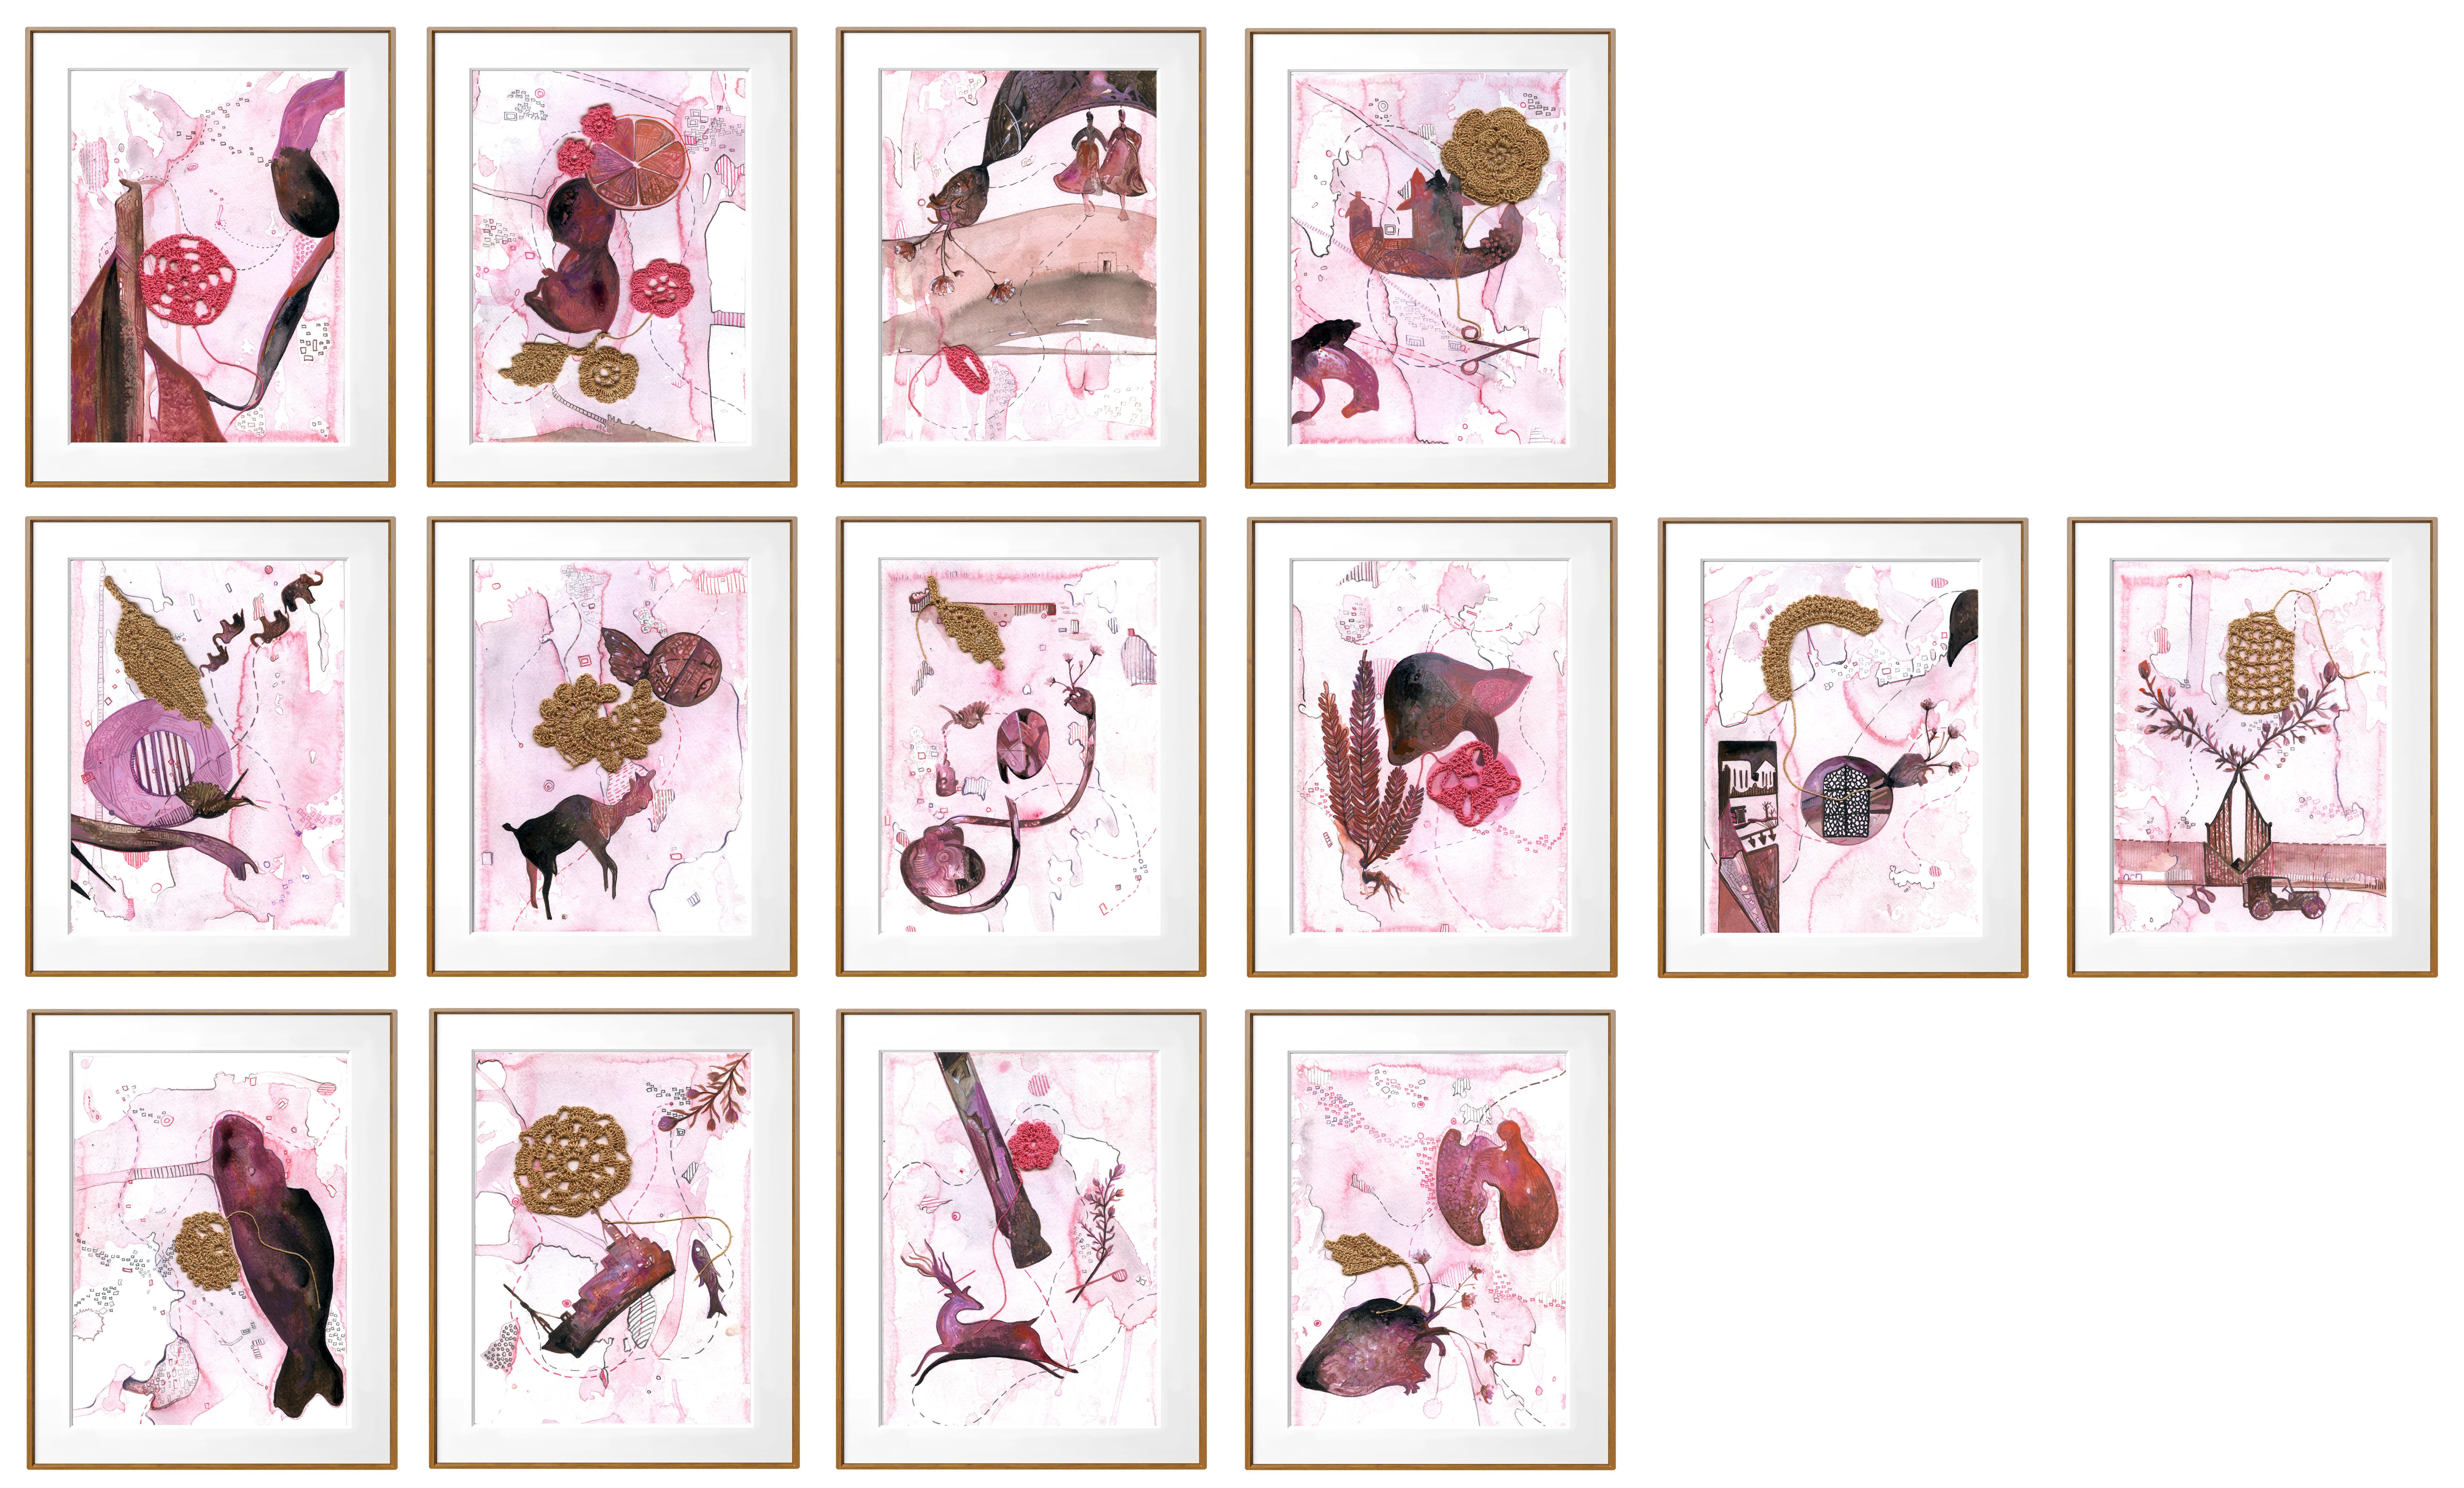 Birth Healing -  14 panel Pink, Red, and Grey Painting by Indian Artist  2